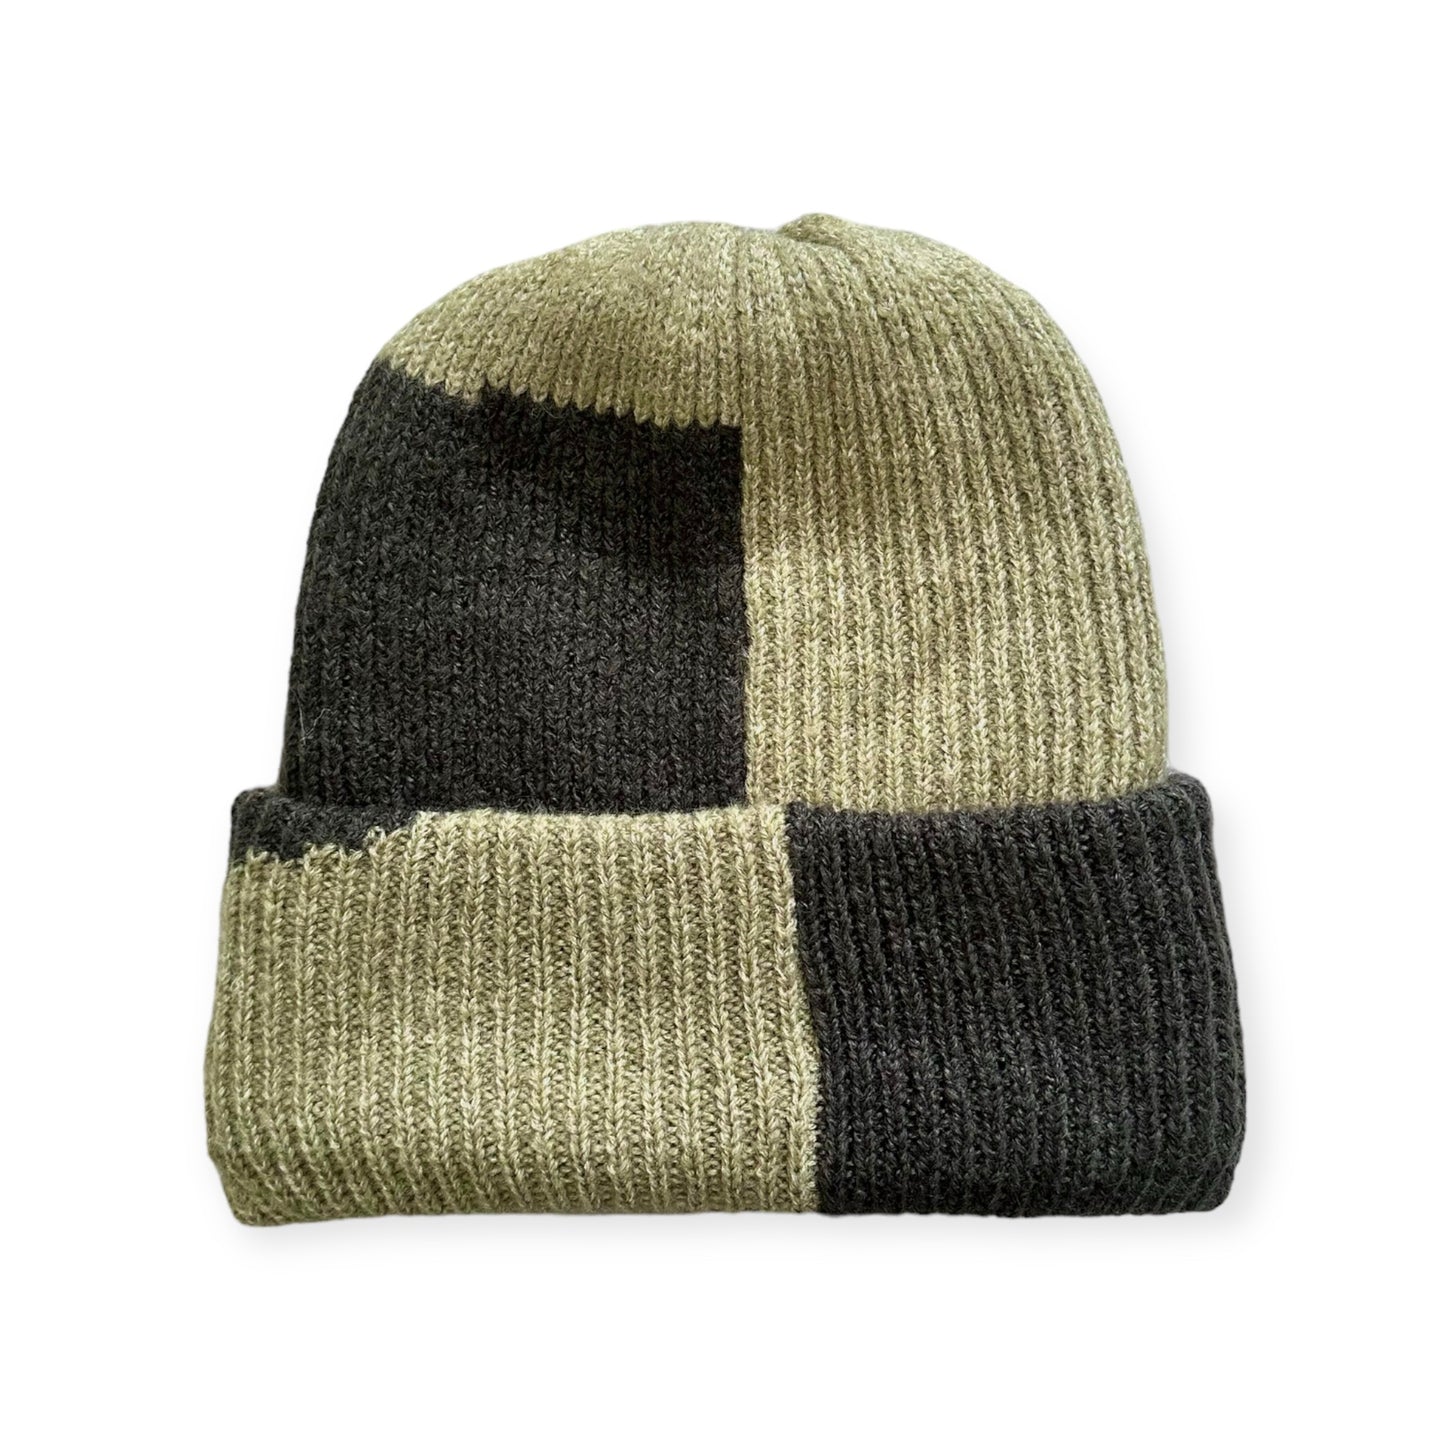 Contast colour way beanies